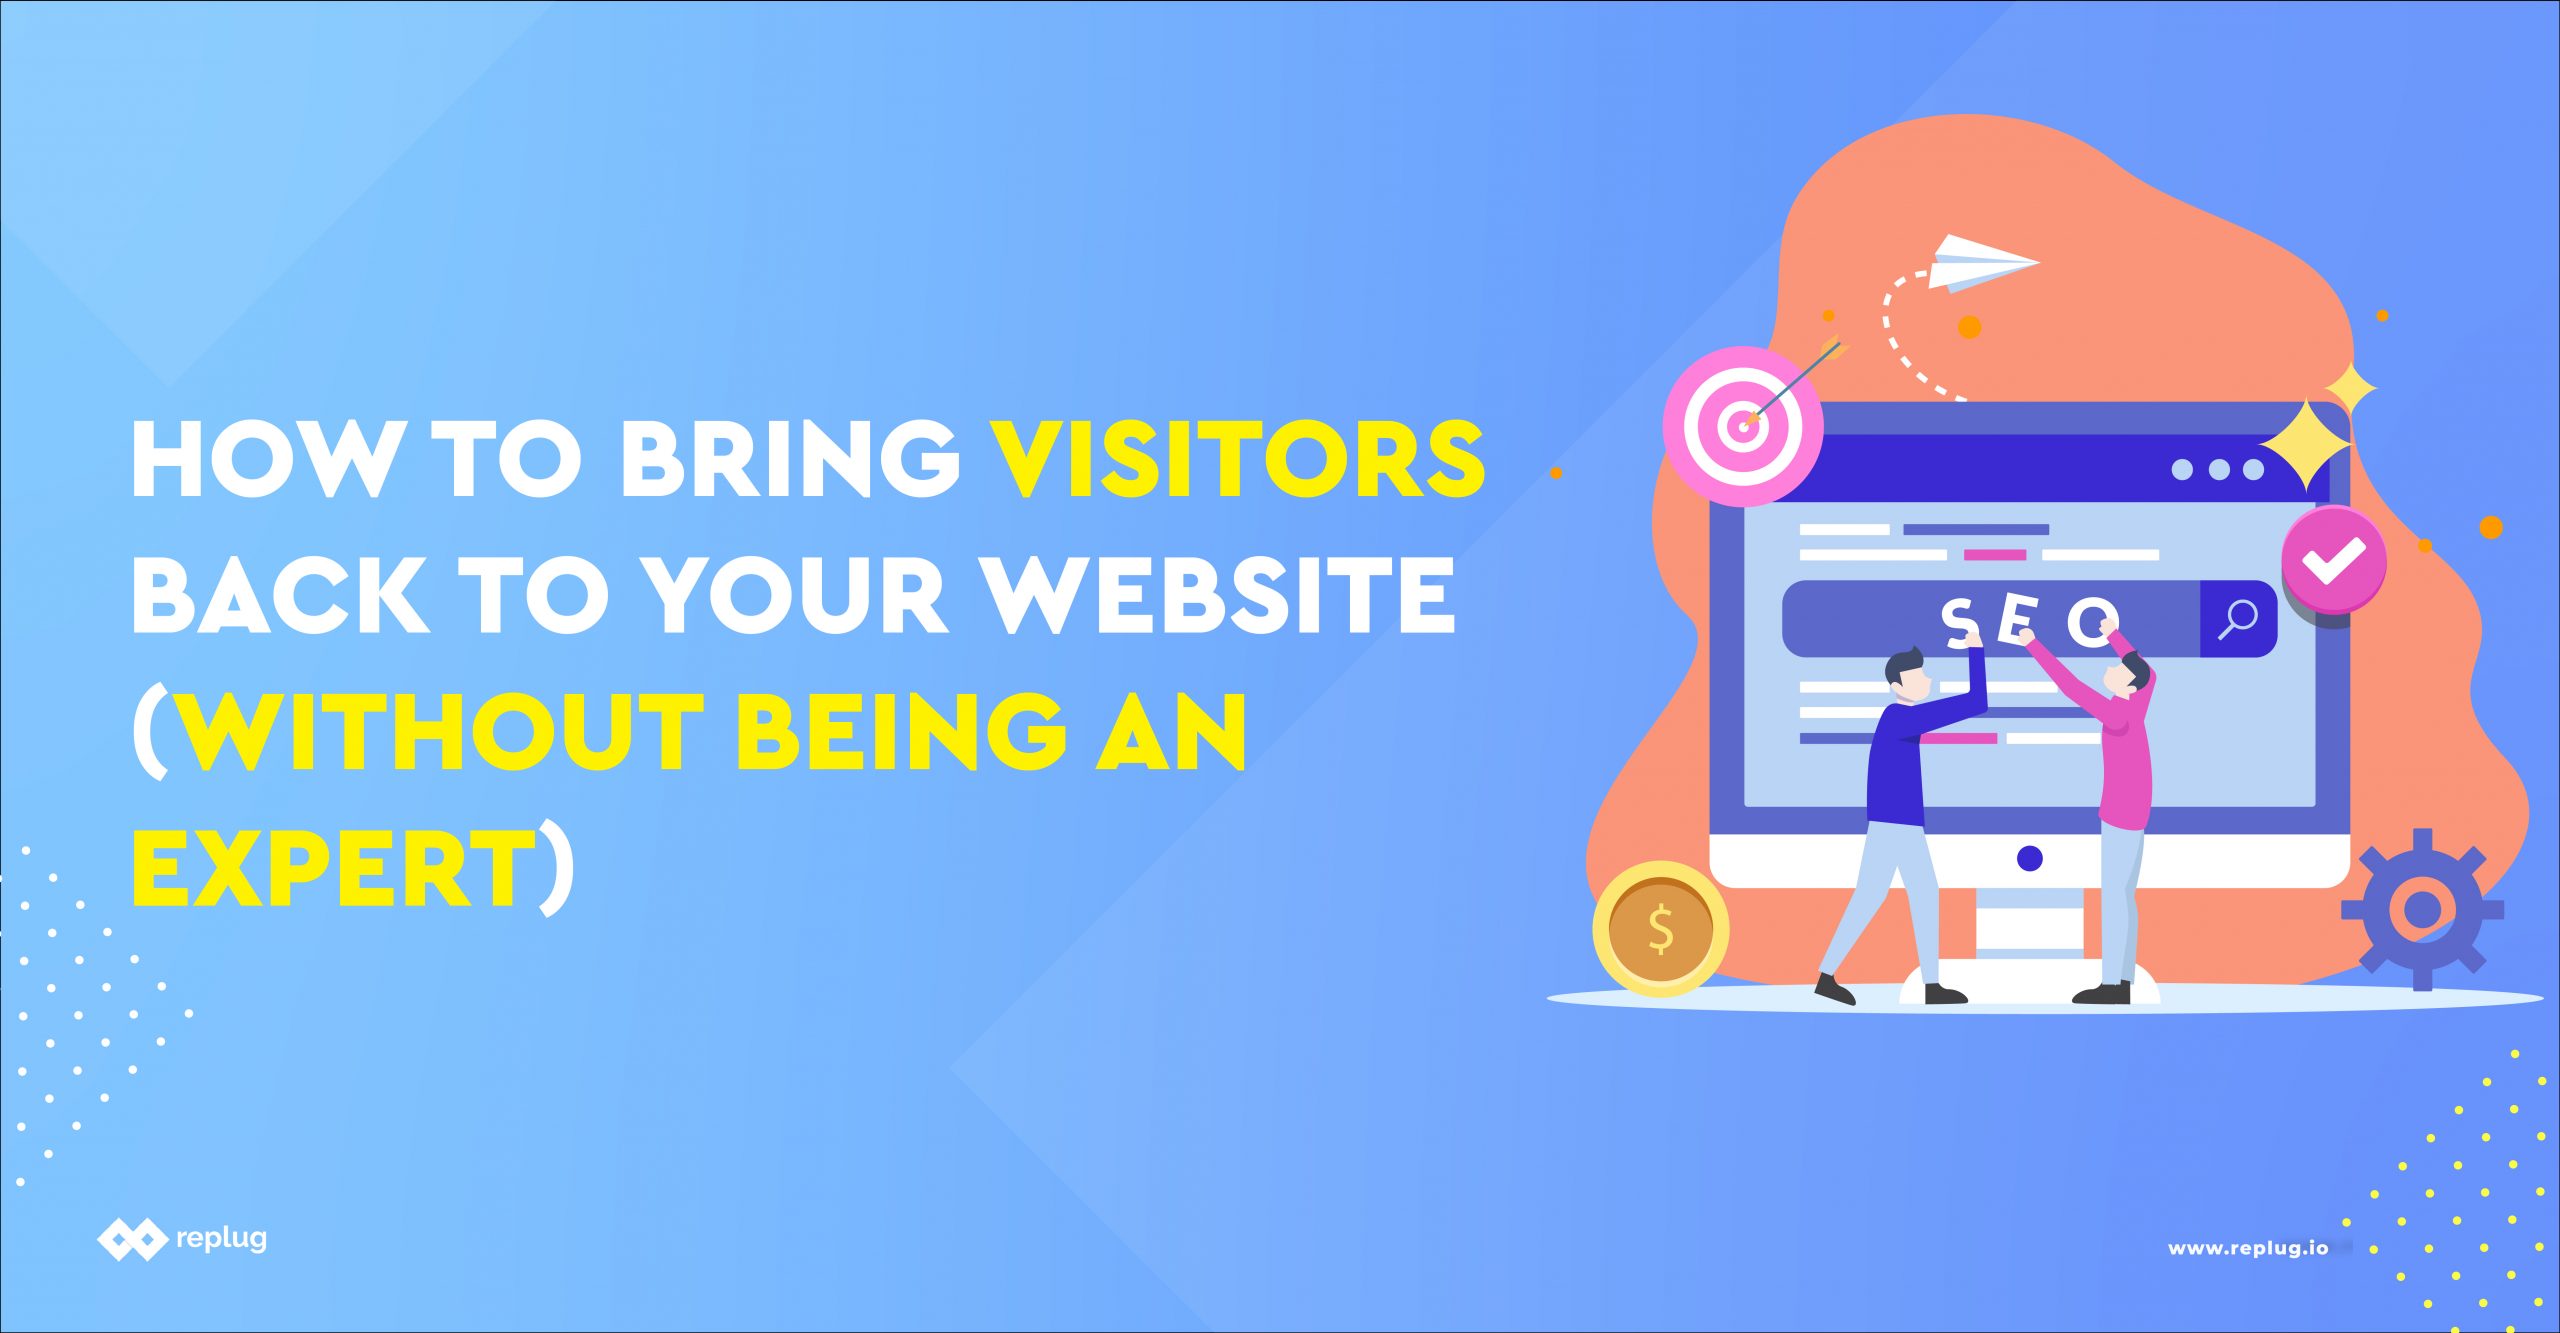 How to Bring Visitors Back to Your Website